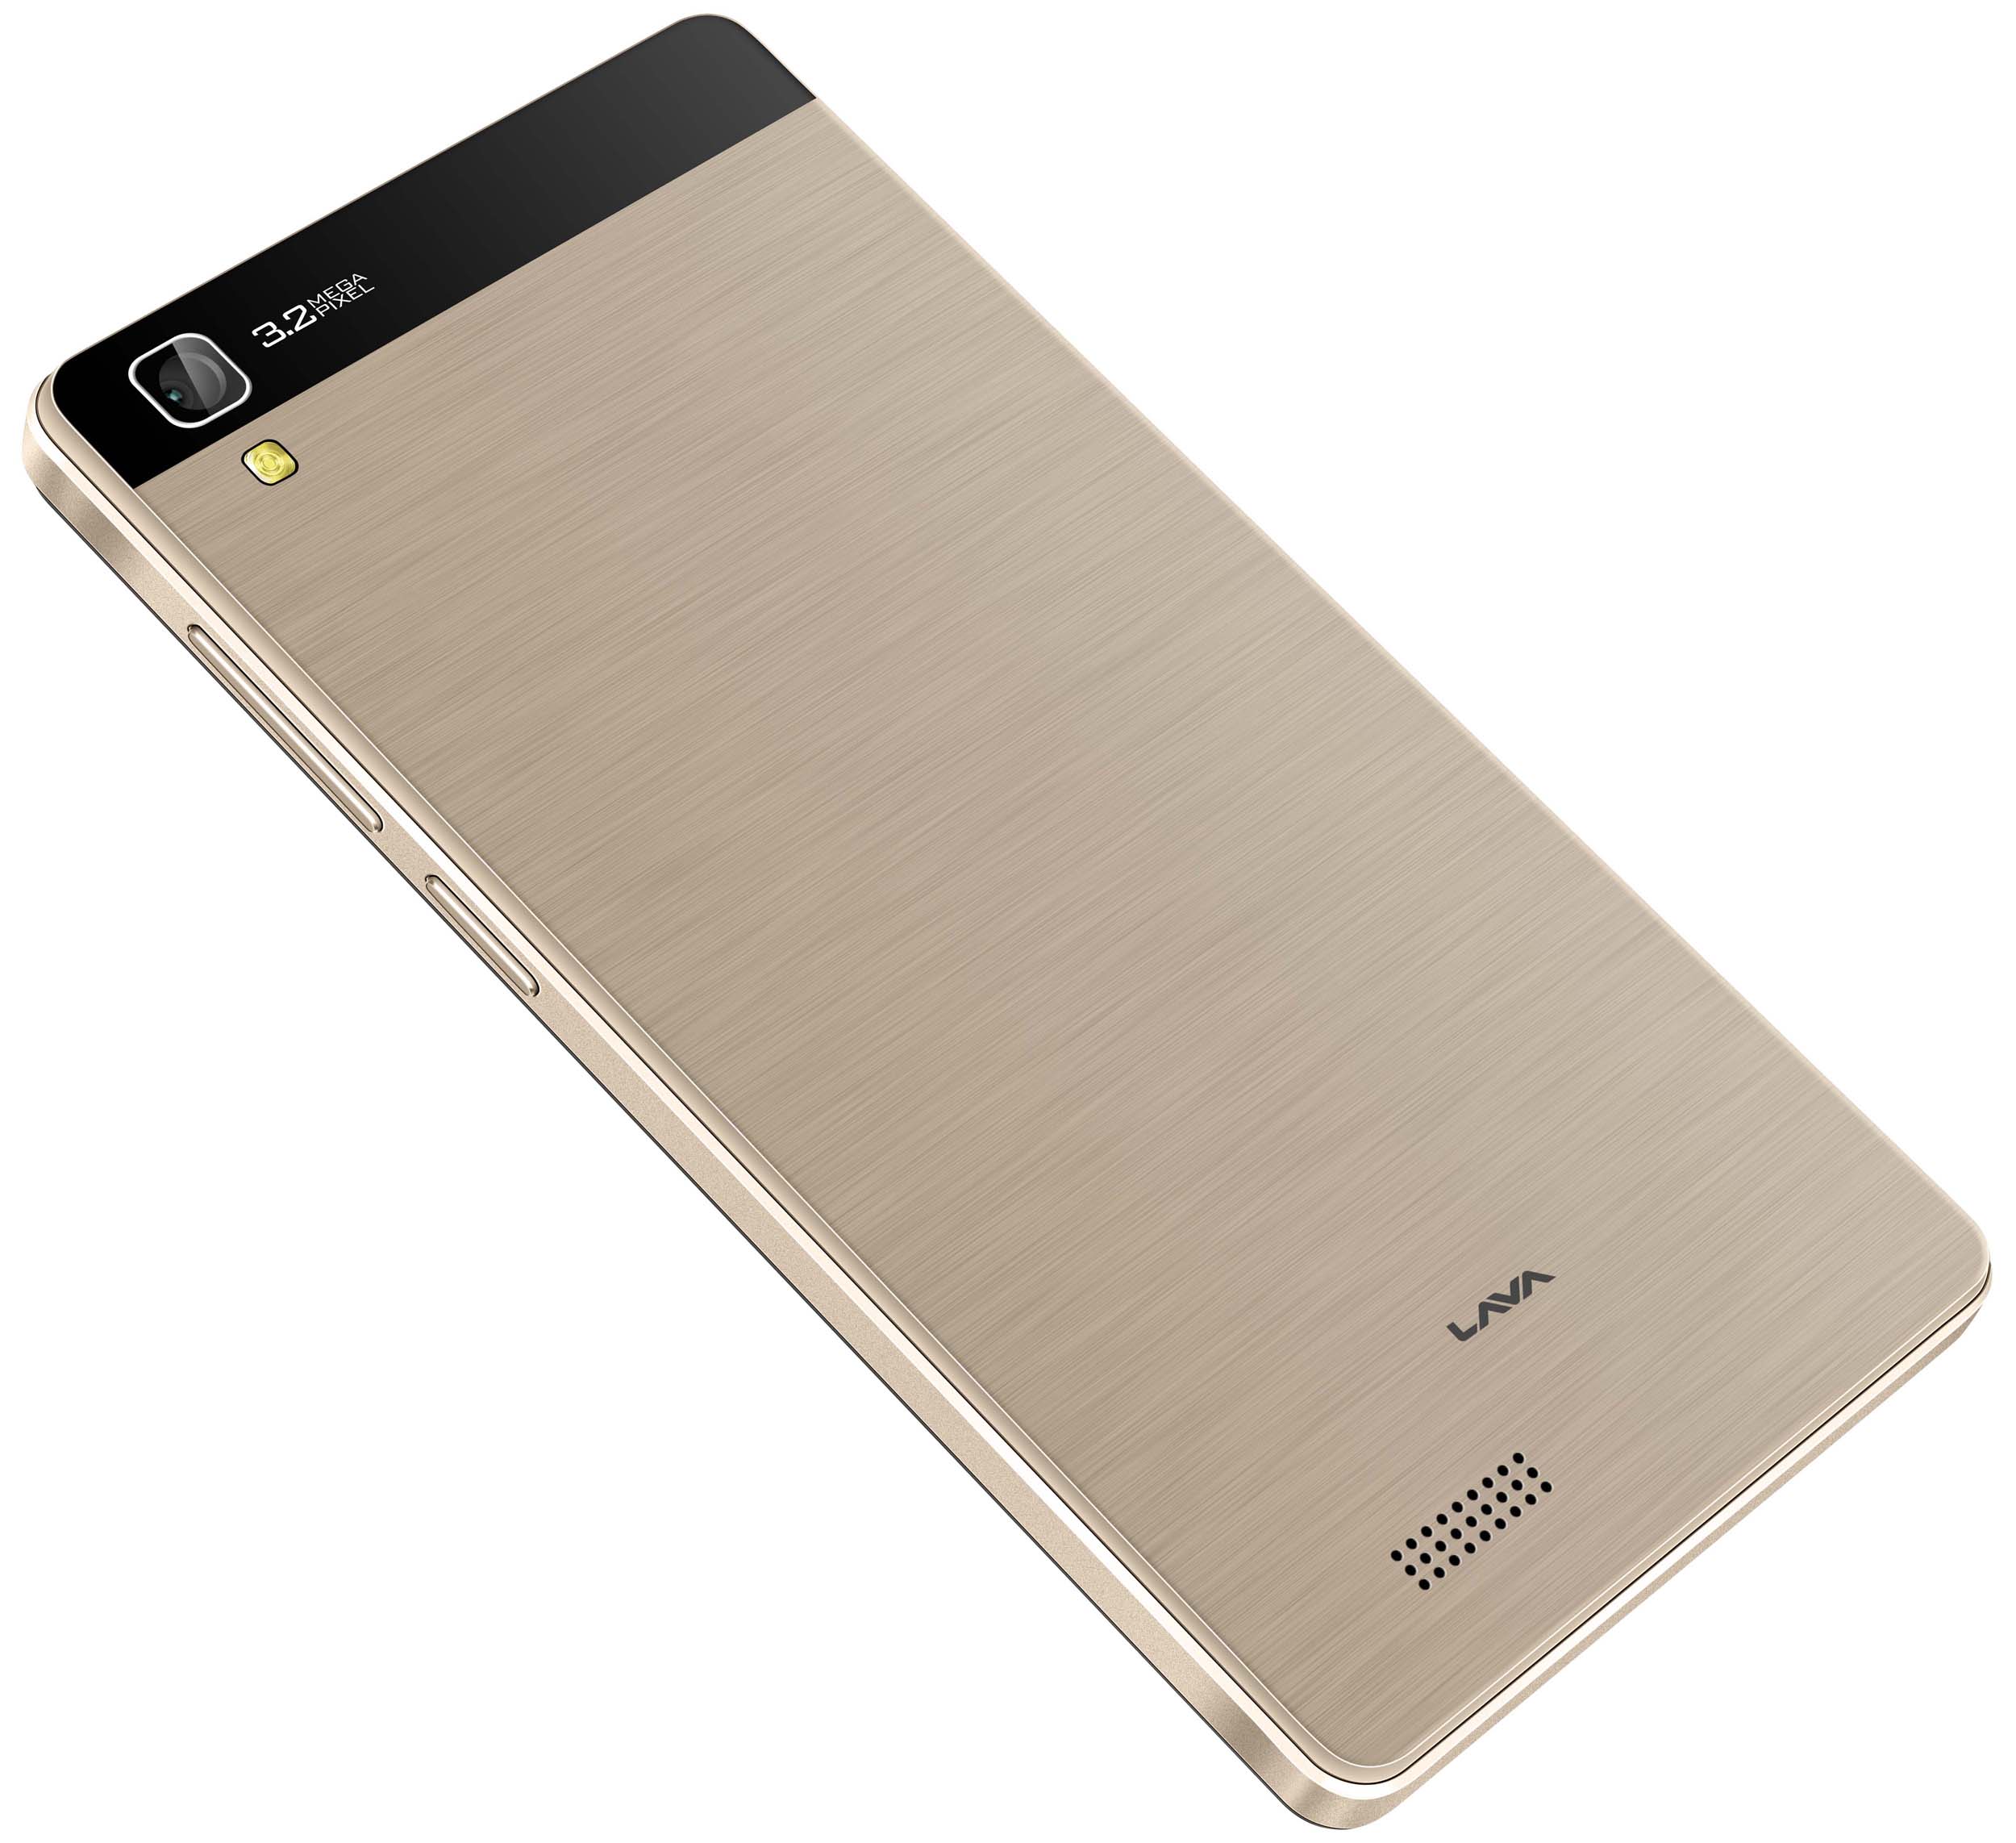 Lava Flair S1 With 3.2-MP Camera